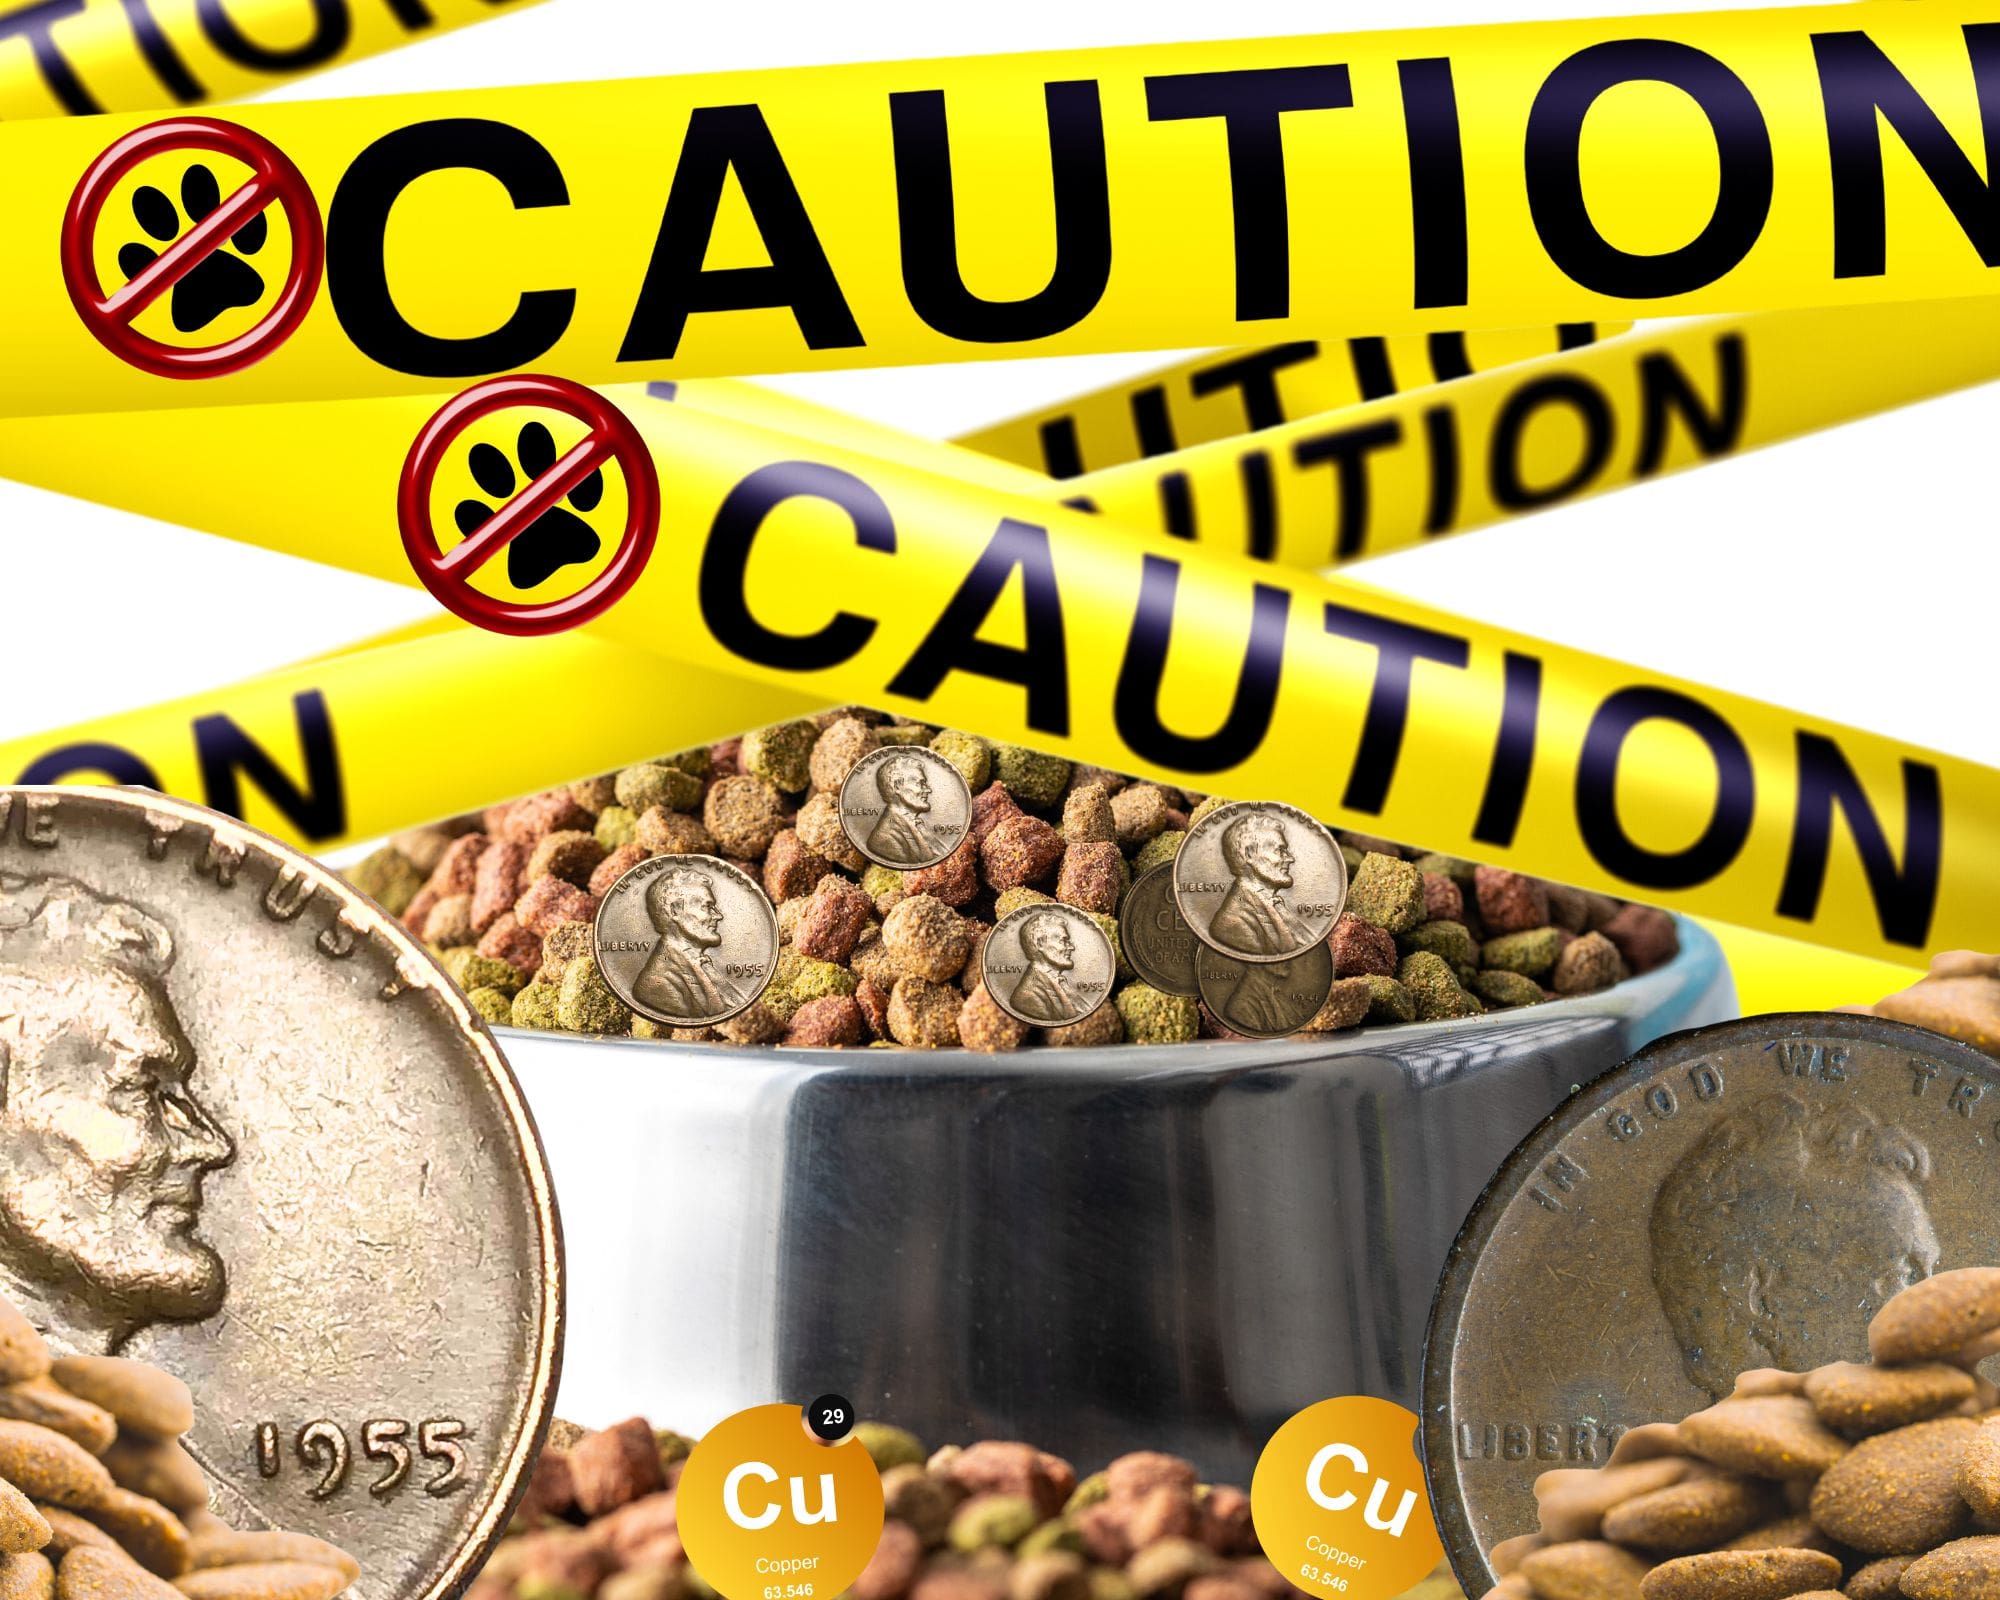 Leading Liver Veterinarians Sound Alarm on Excess Copper in Dog Food; Regulators Stall